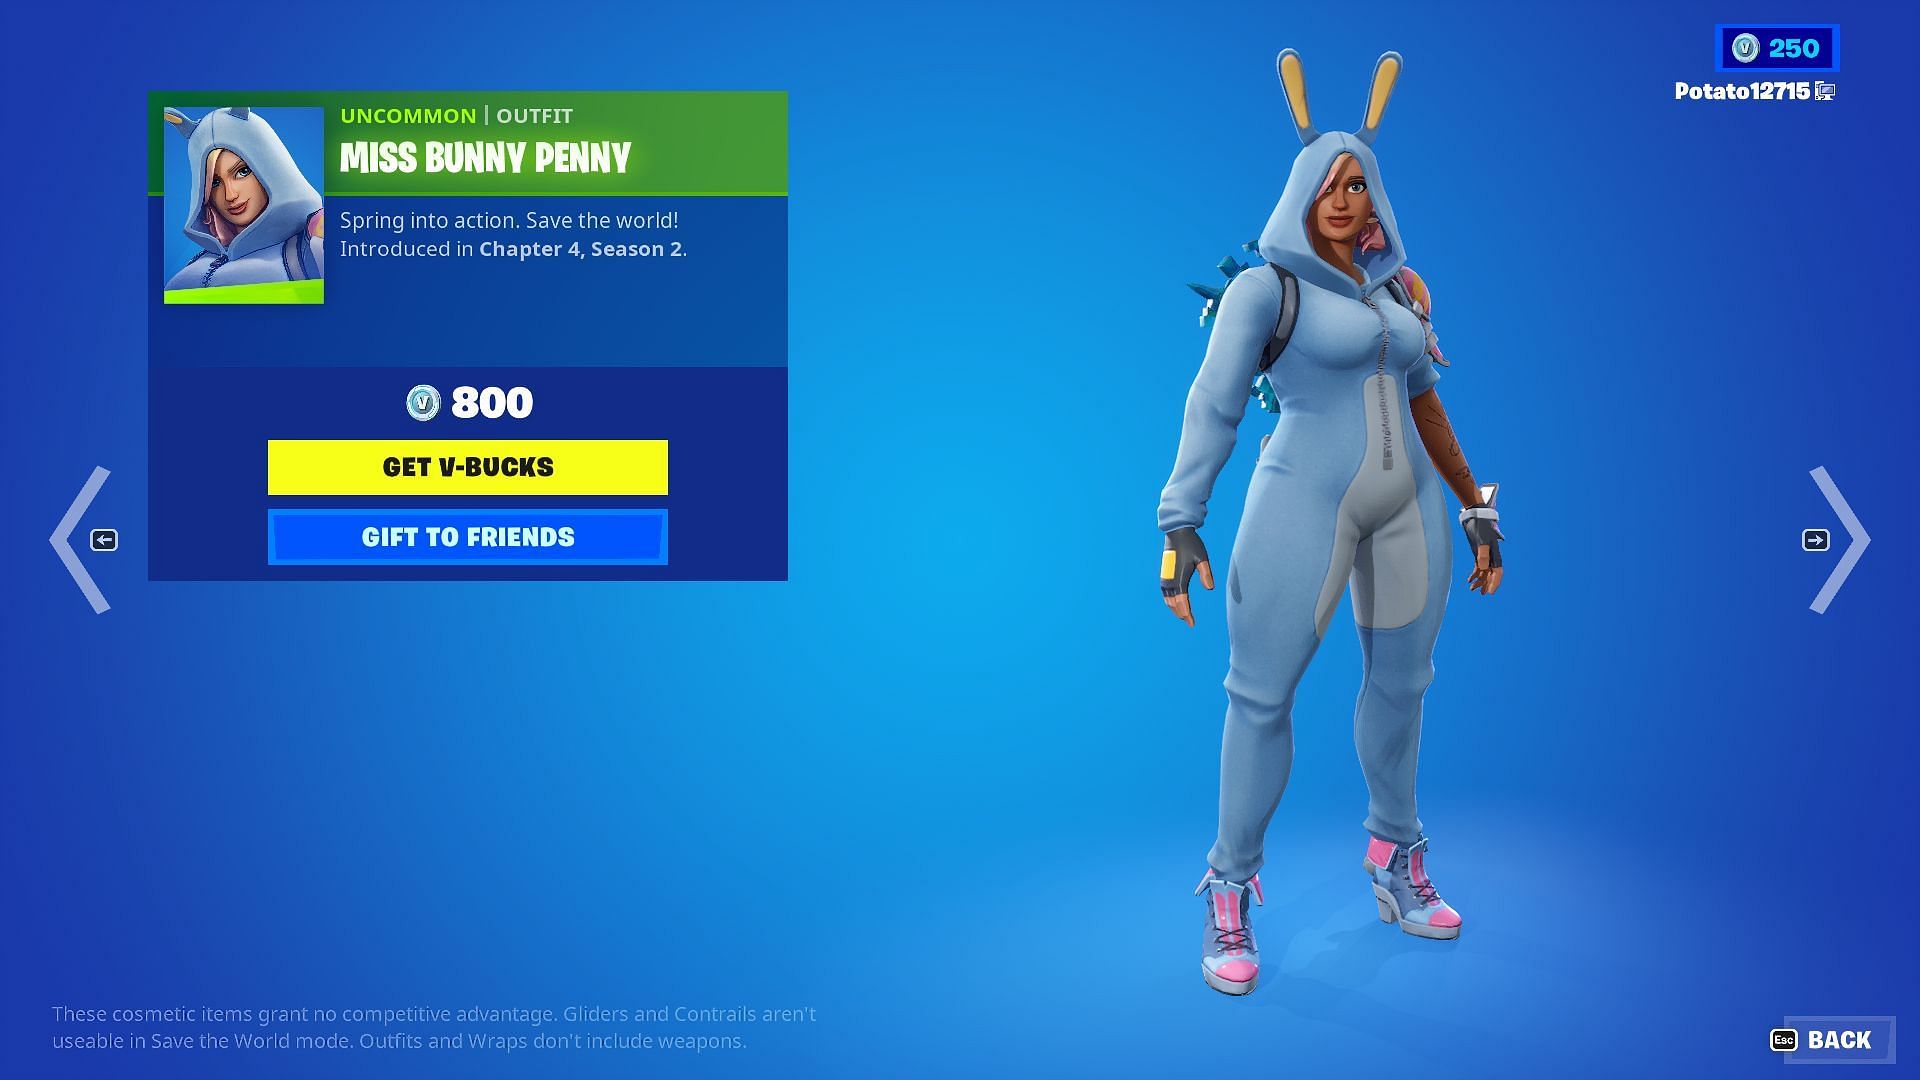 Miss Bunny Penny Outfit is available in the Item Shop for 800 V-Bucks (Image via Epic Games/Fortnite)